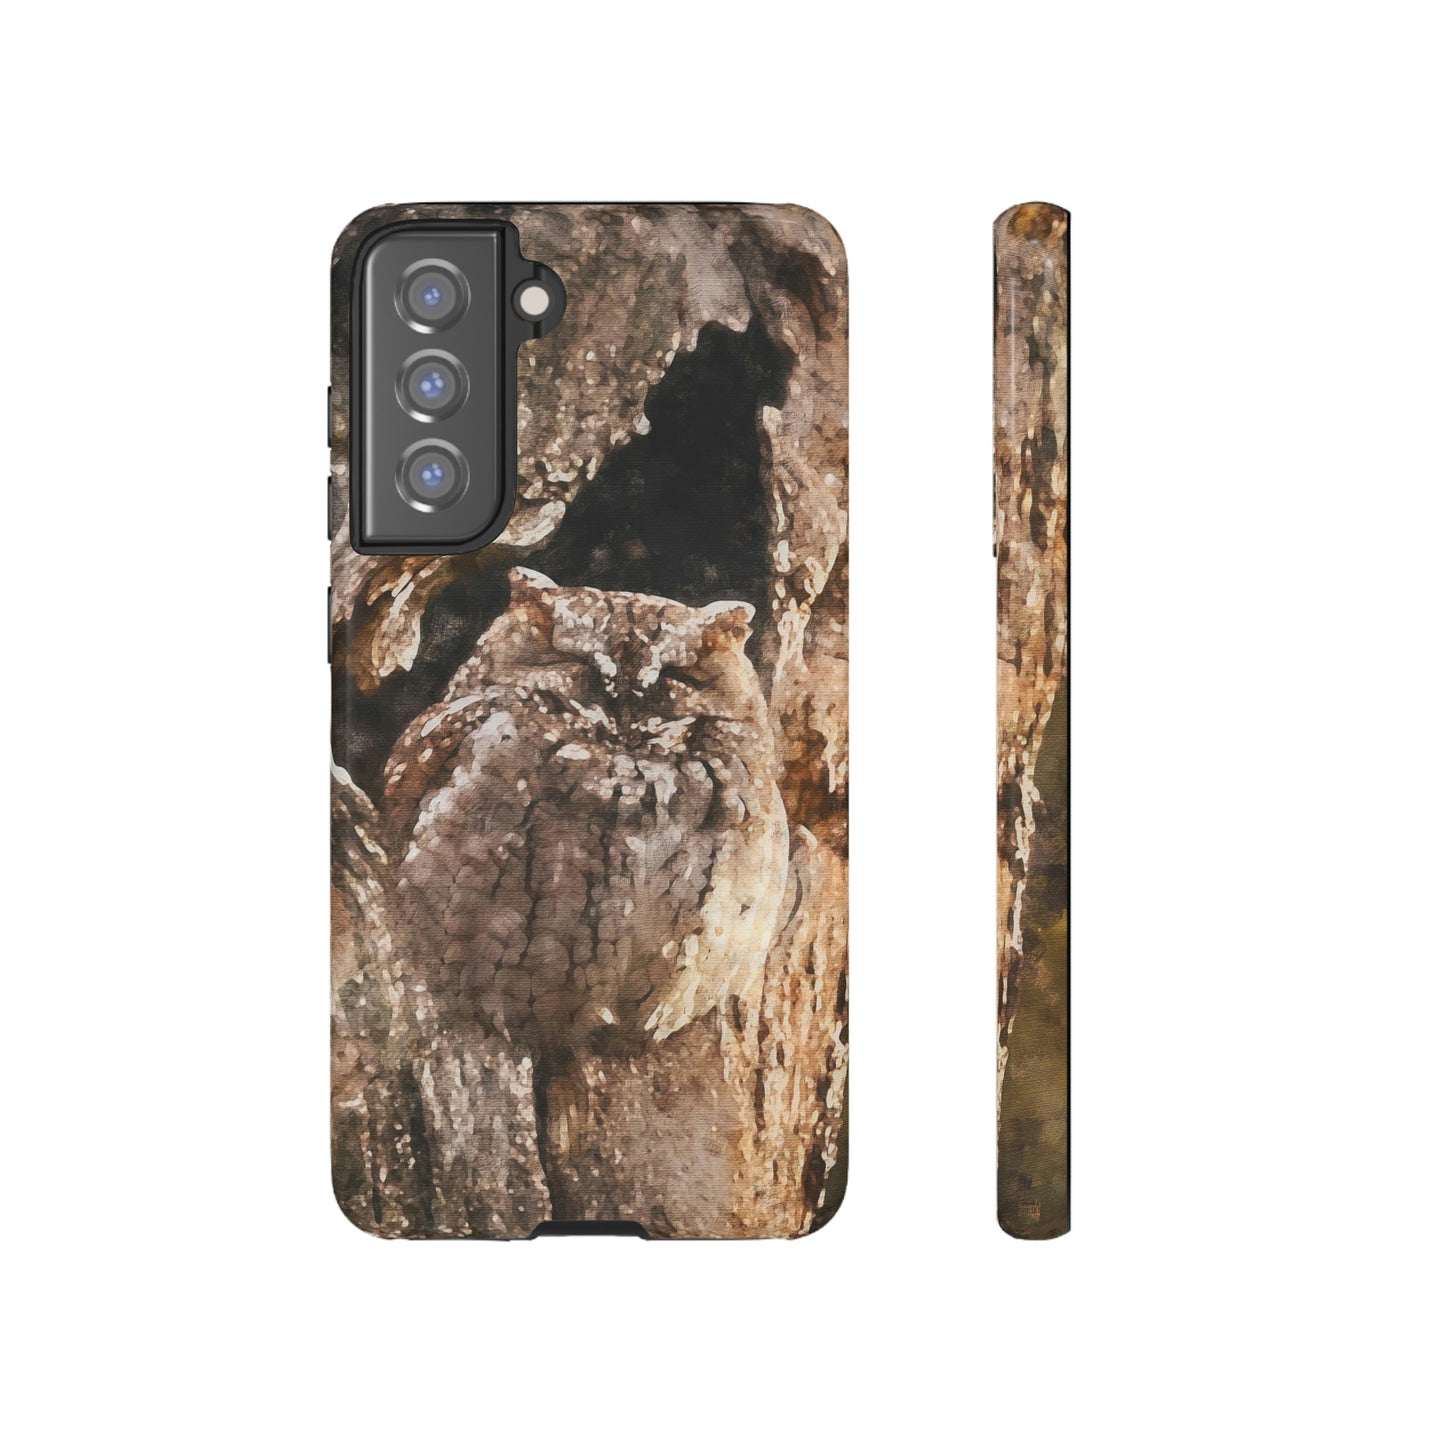 Sleepy Screechy Tough Case for iPhone and Android devices